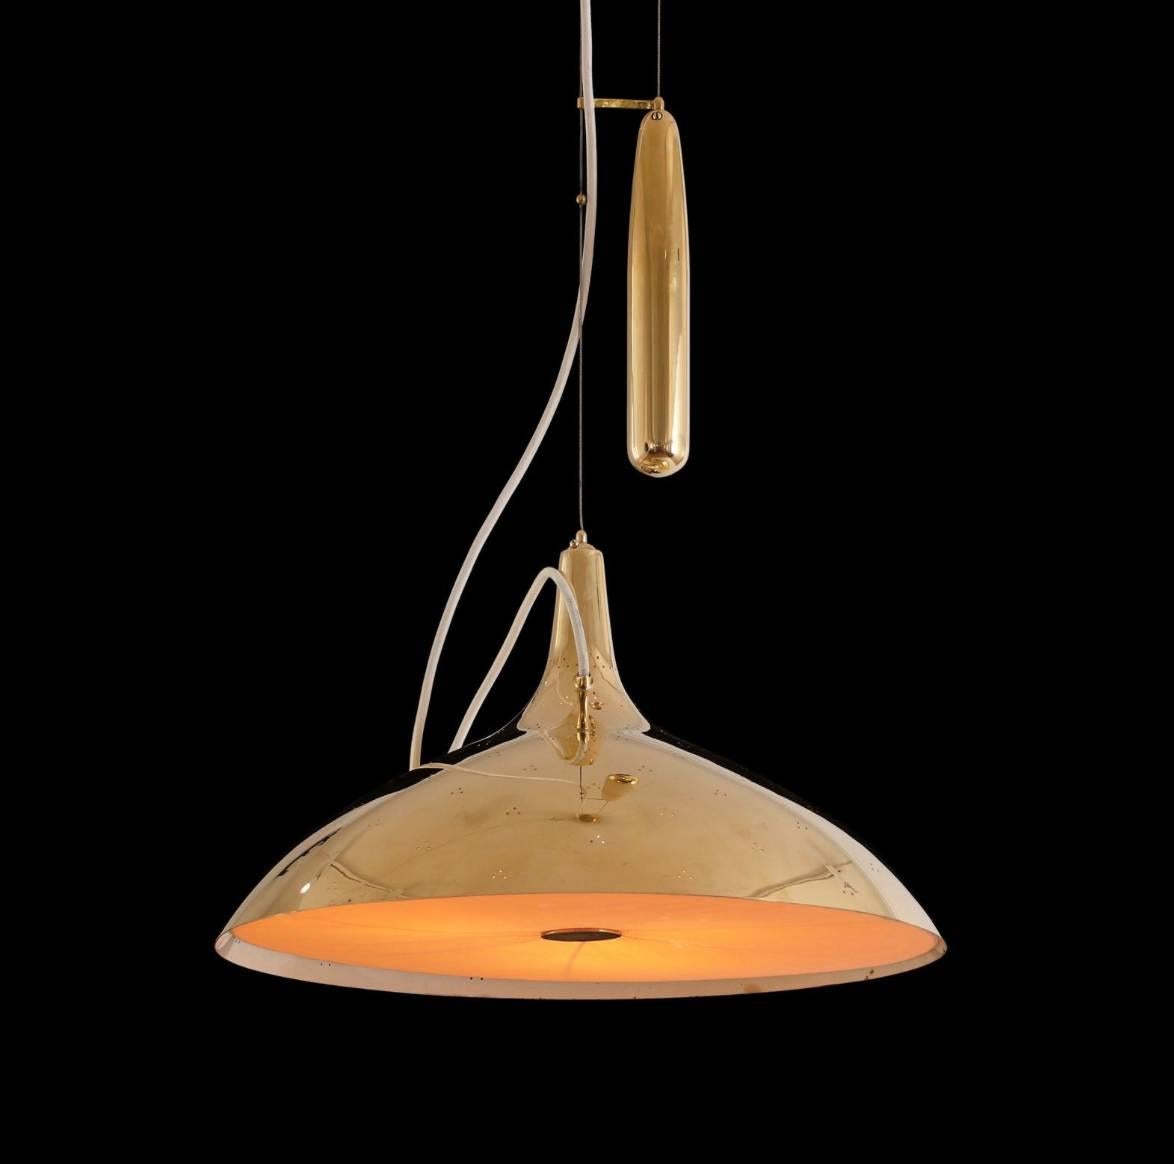 Mid-Century Modern Paavo Tynell Brass Counter Weight Pendant Lamp A1965, Taito Oy, Finland, 1950s